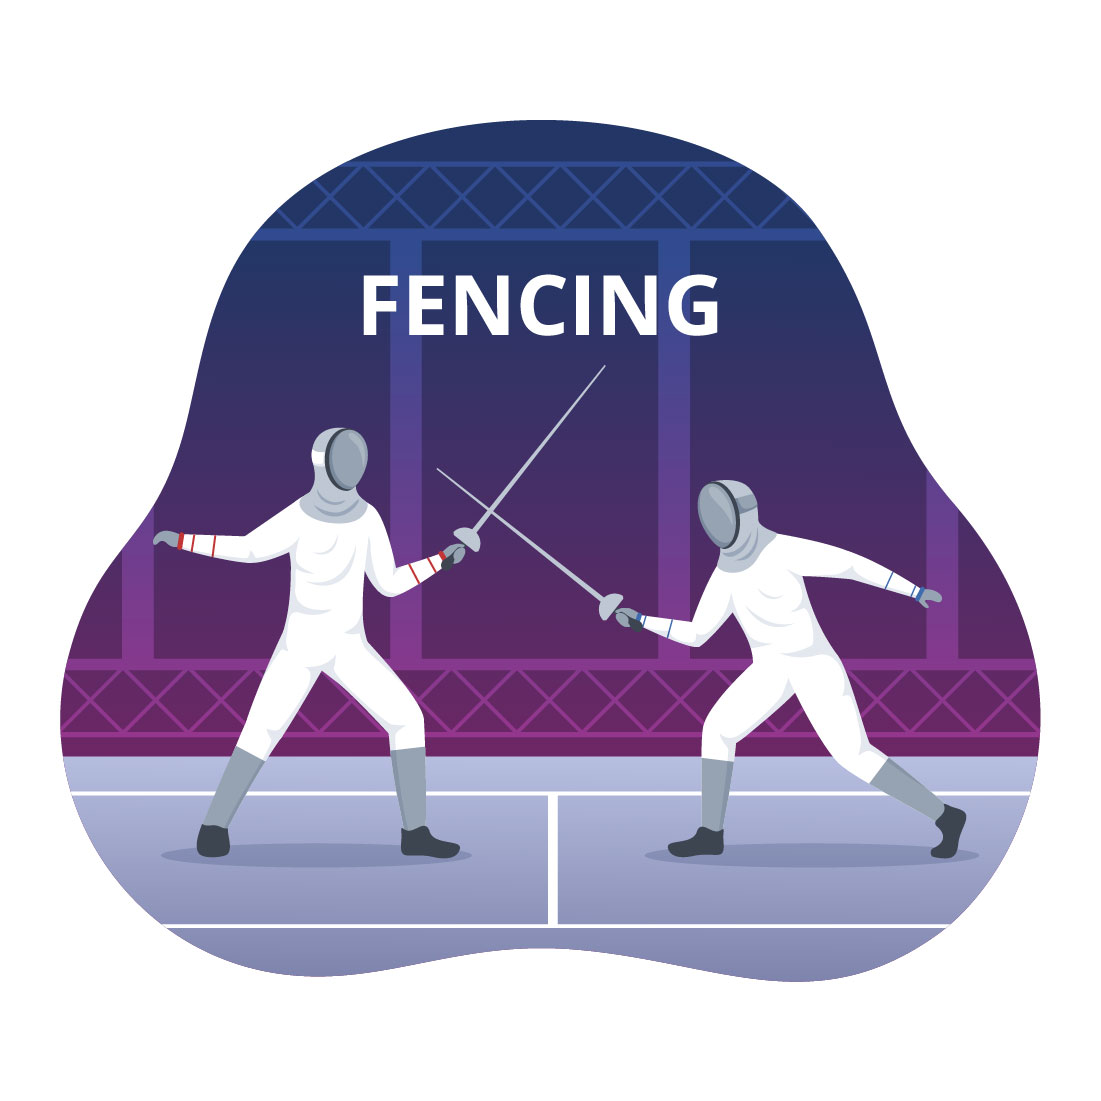 10 Fencing Player Sport Illustration main cover.